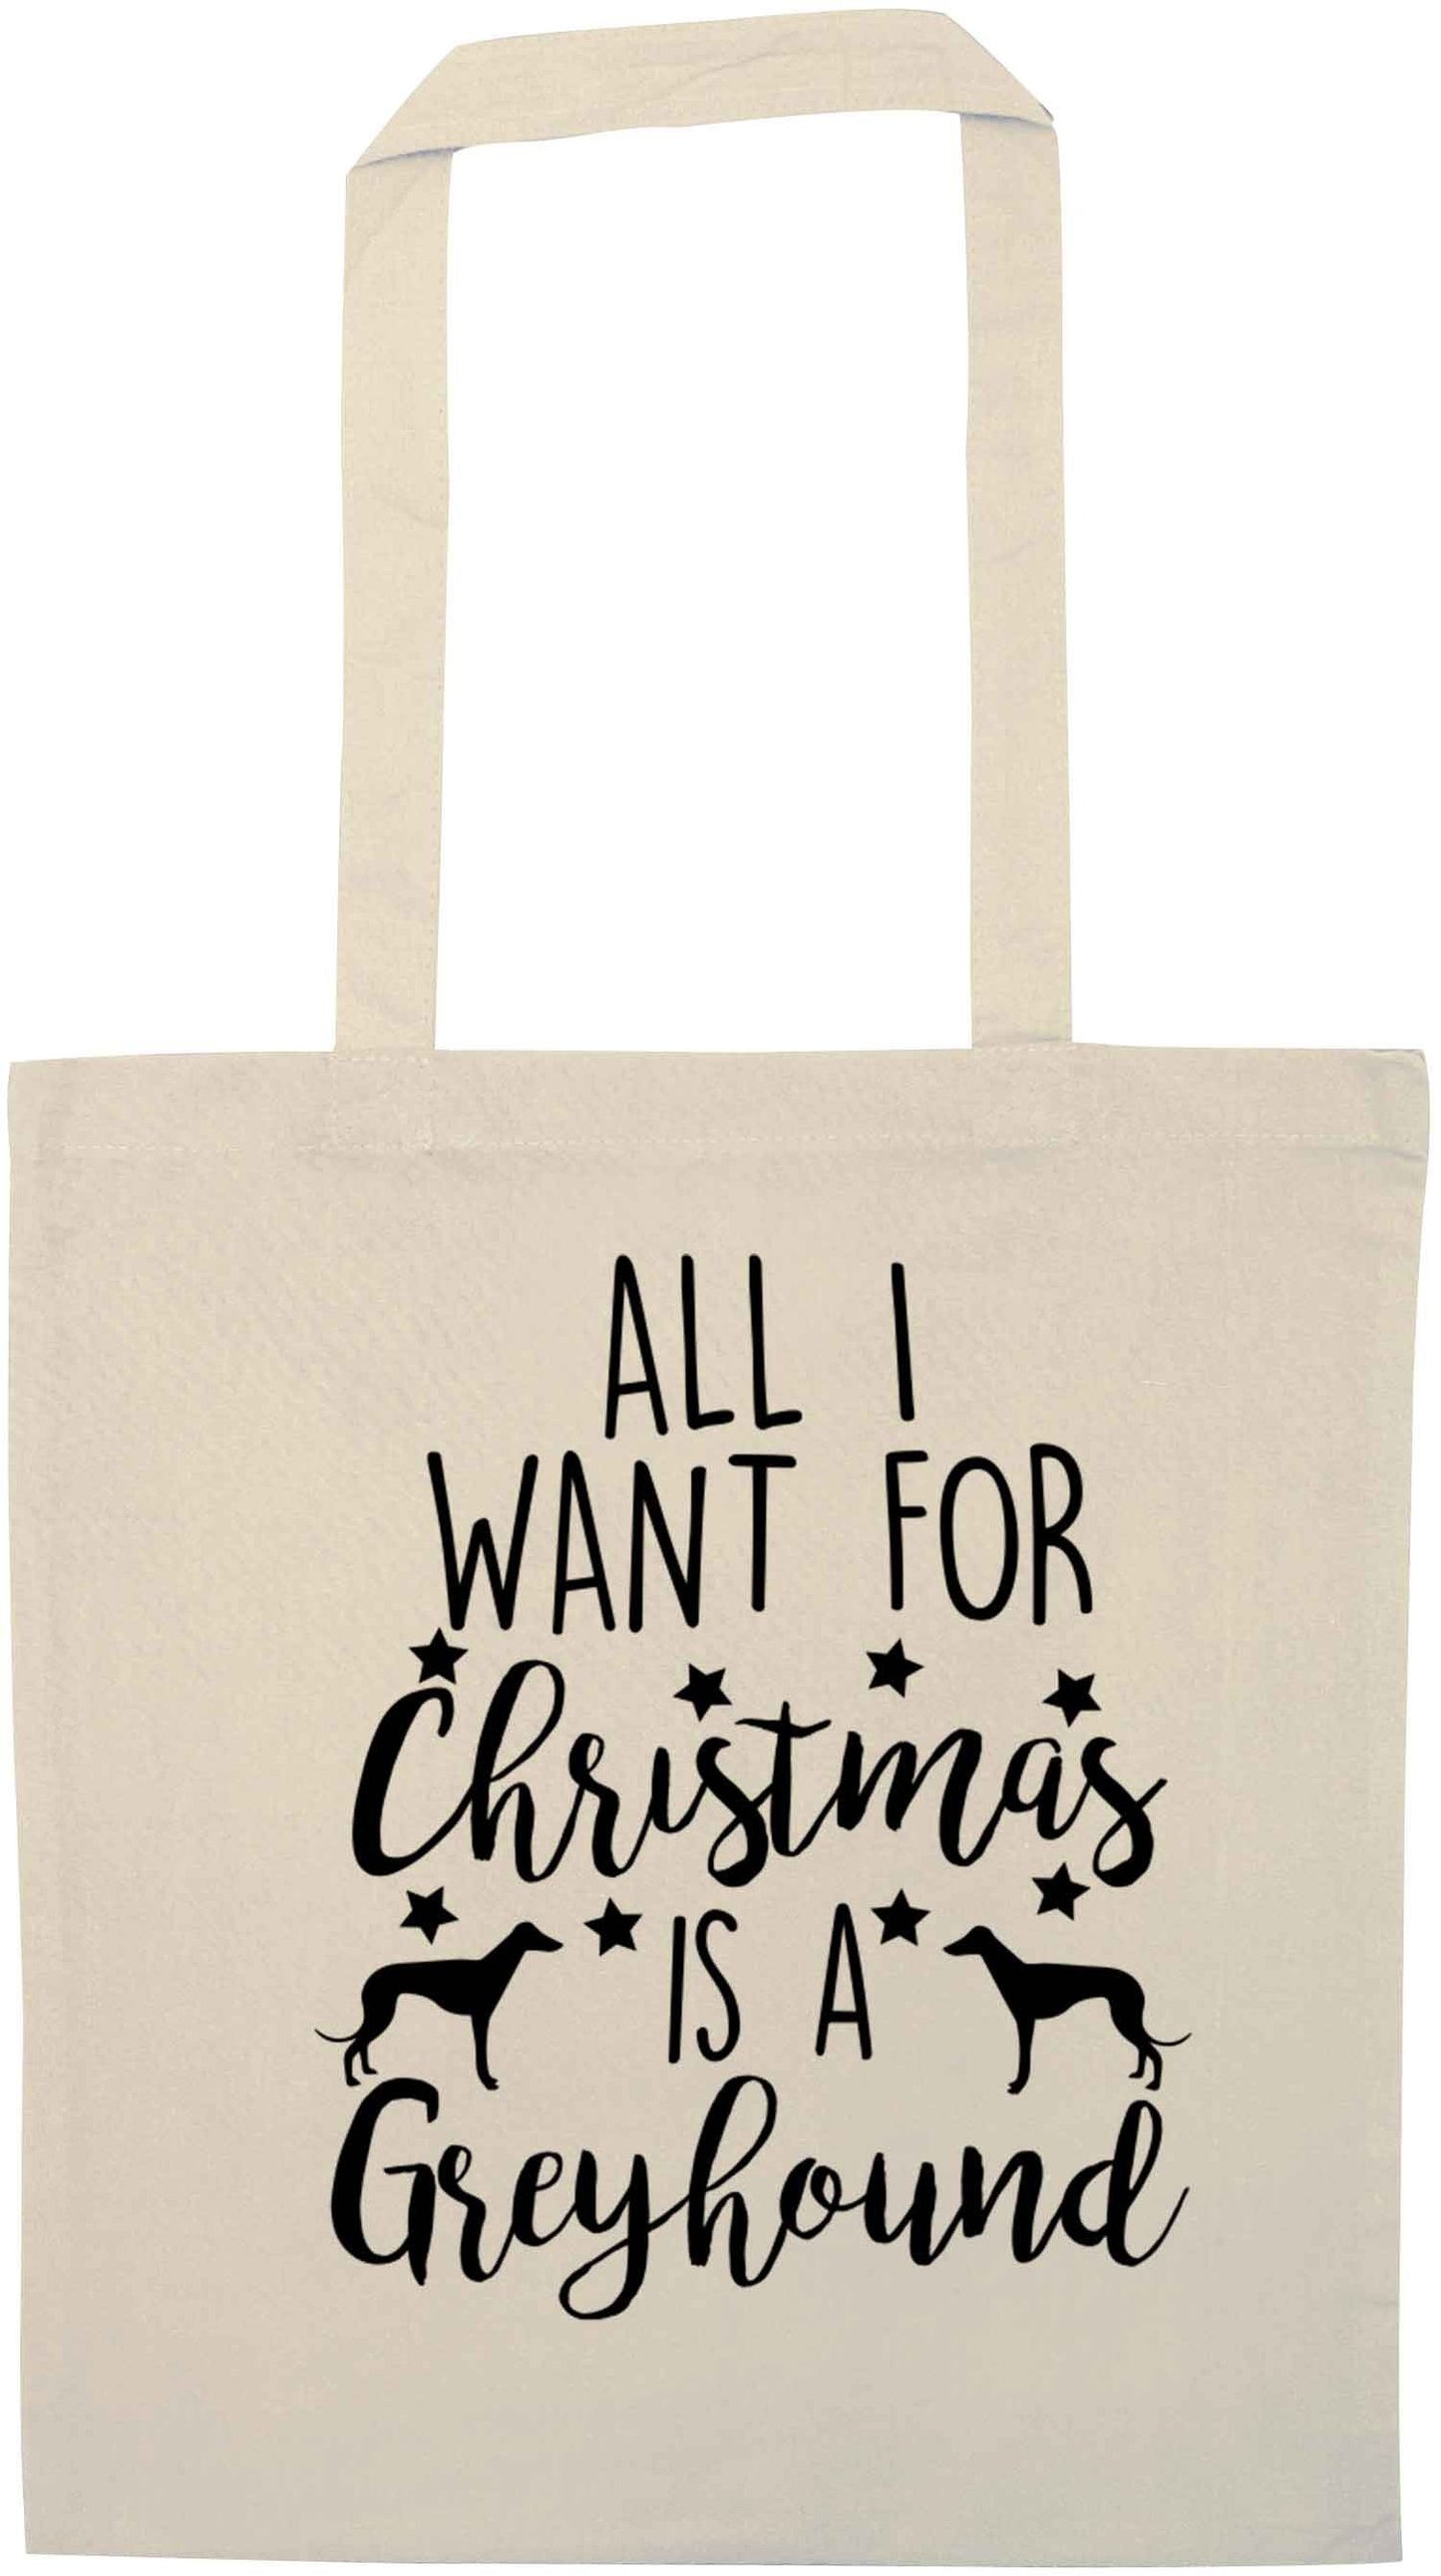 All I want for Christmas is a greyhound natural tote bag